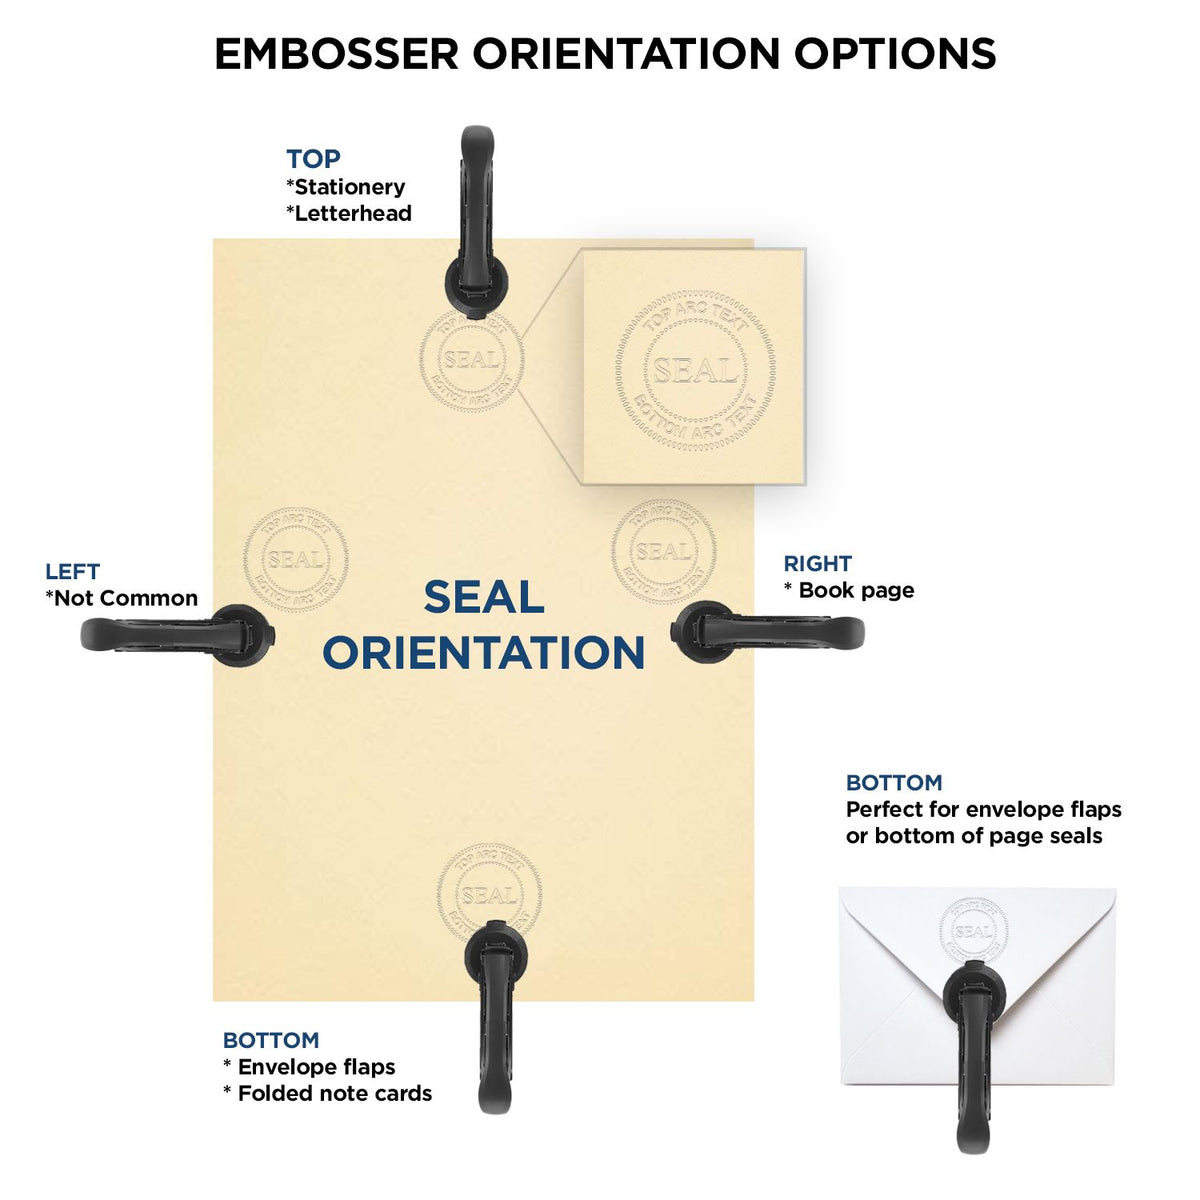 An infographic for the State of Illinois Architectural Seal Embosser showing embosser orientation, this is showing examples of a top, bottom, right and left insert.